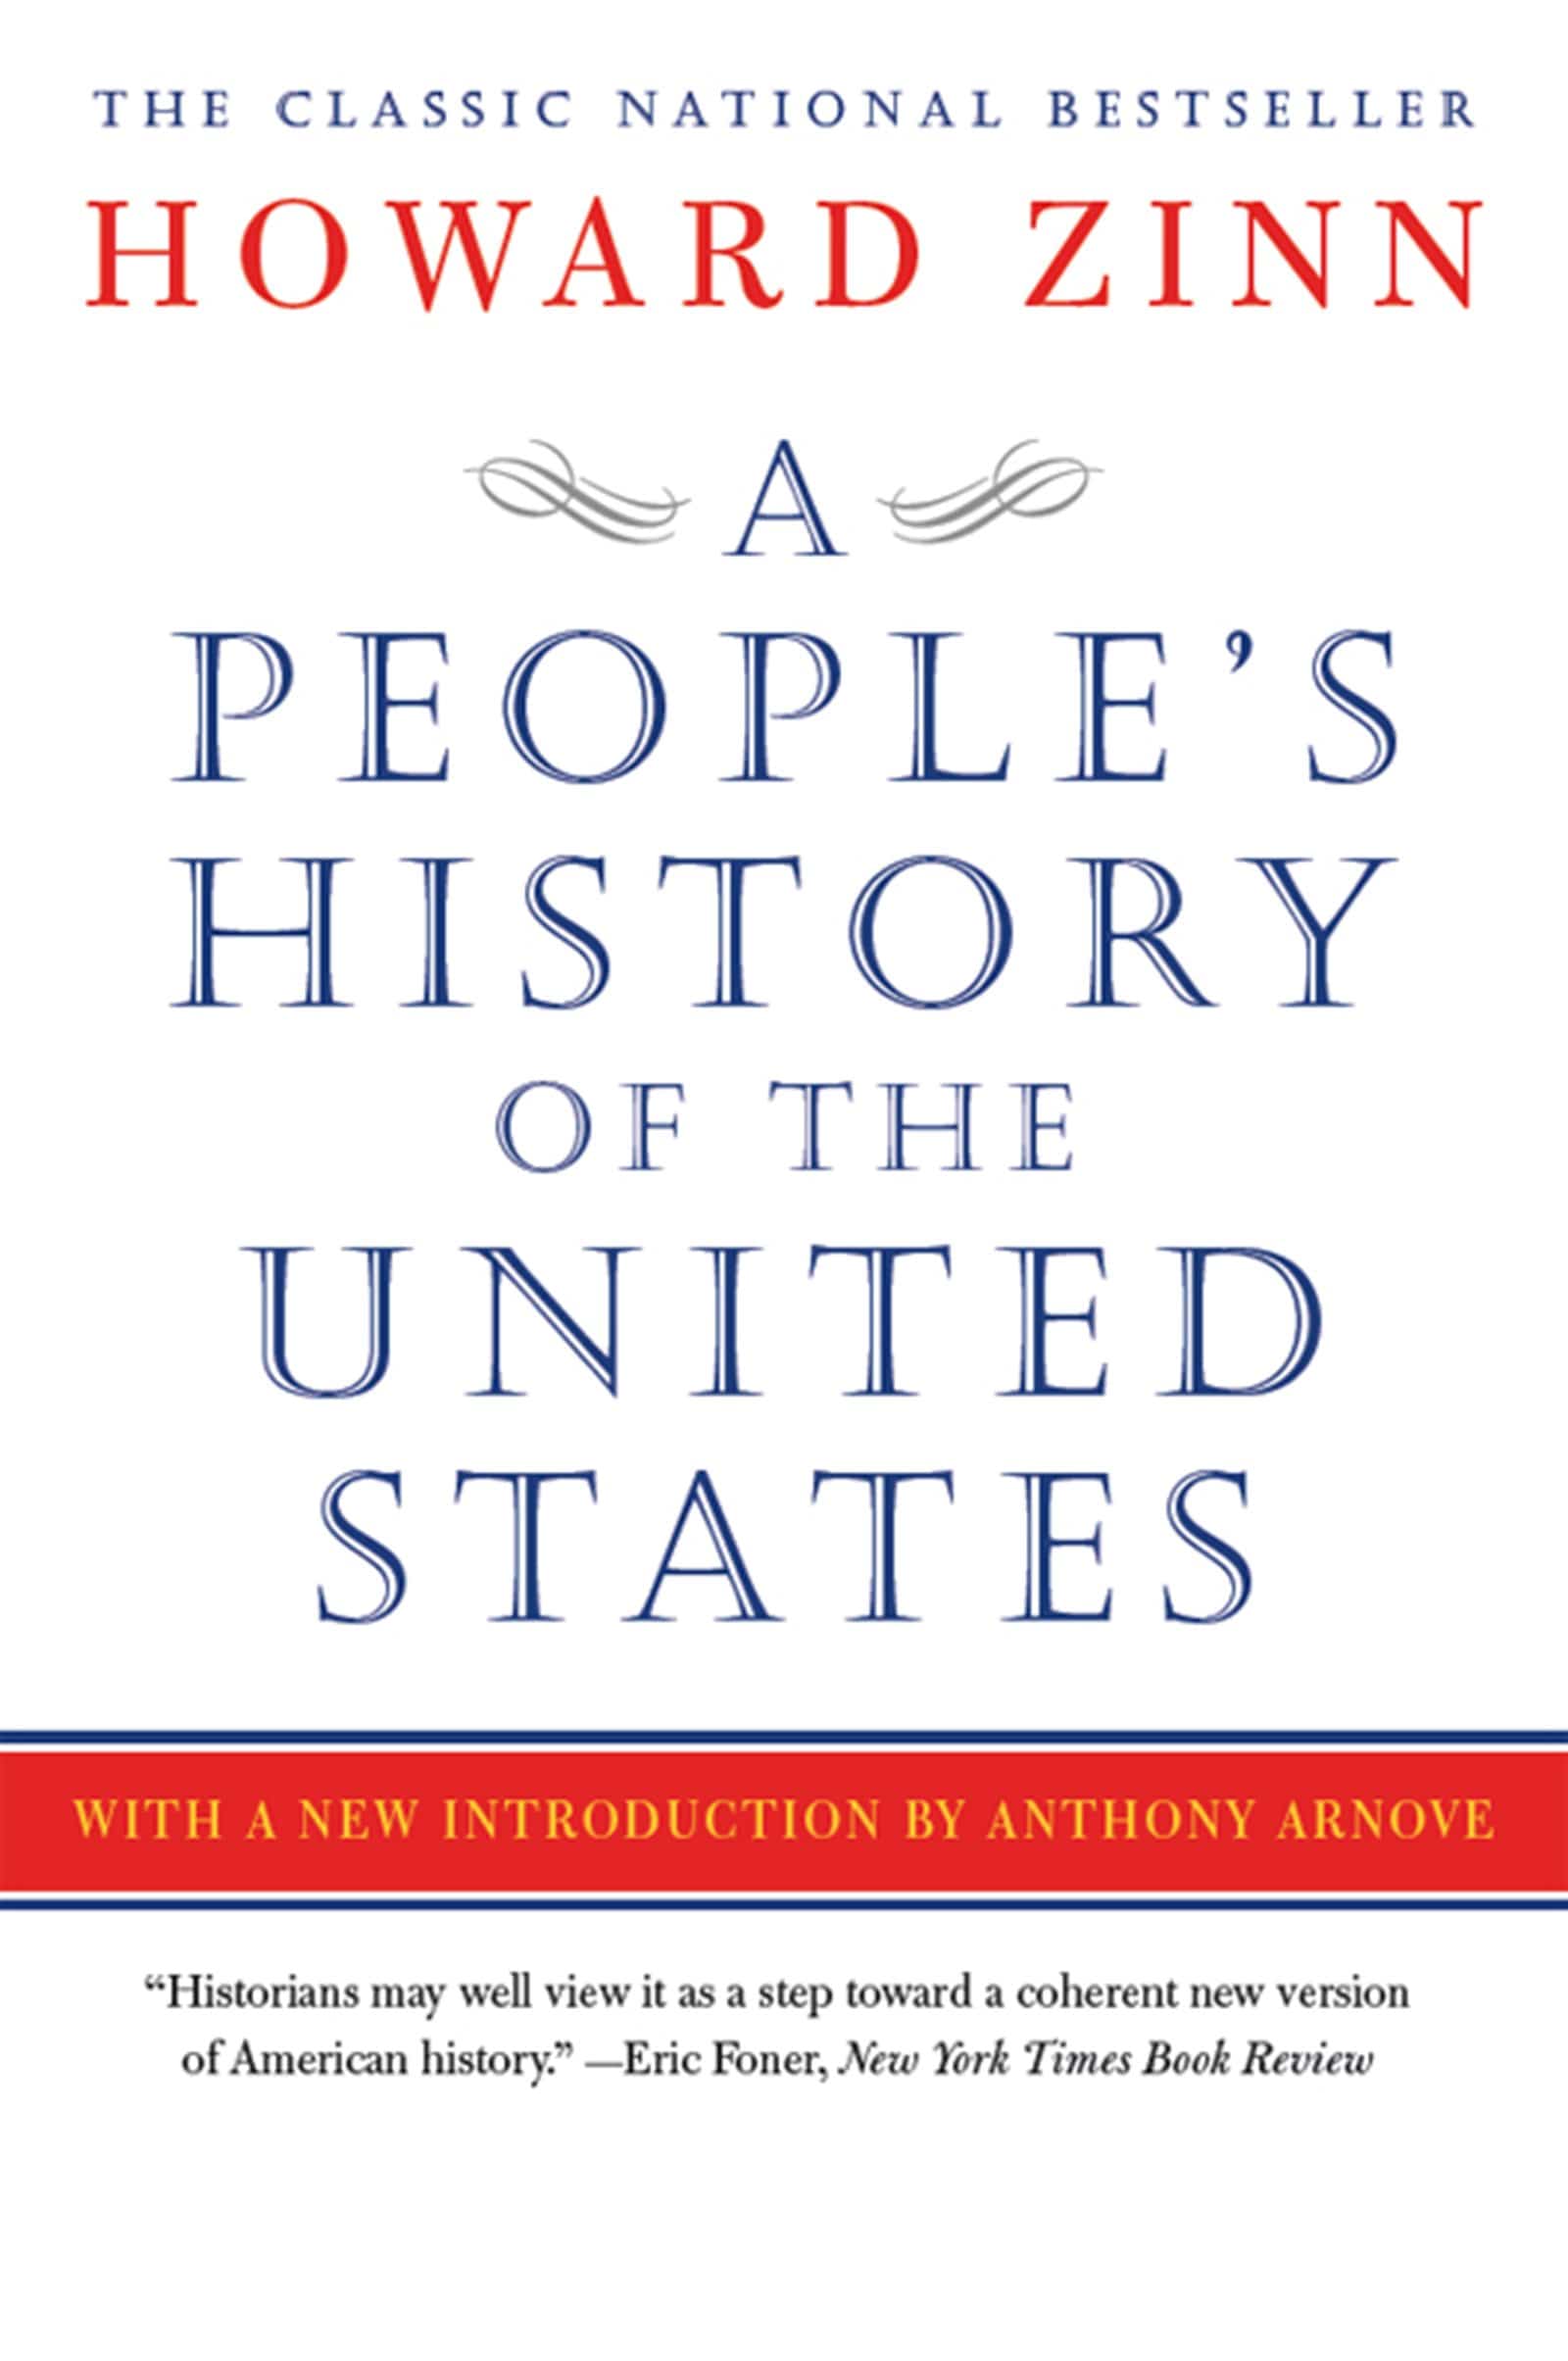 The cover of A People's History of the United States